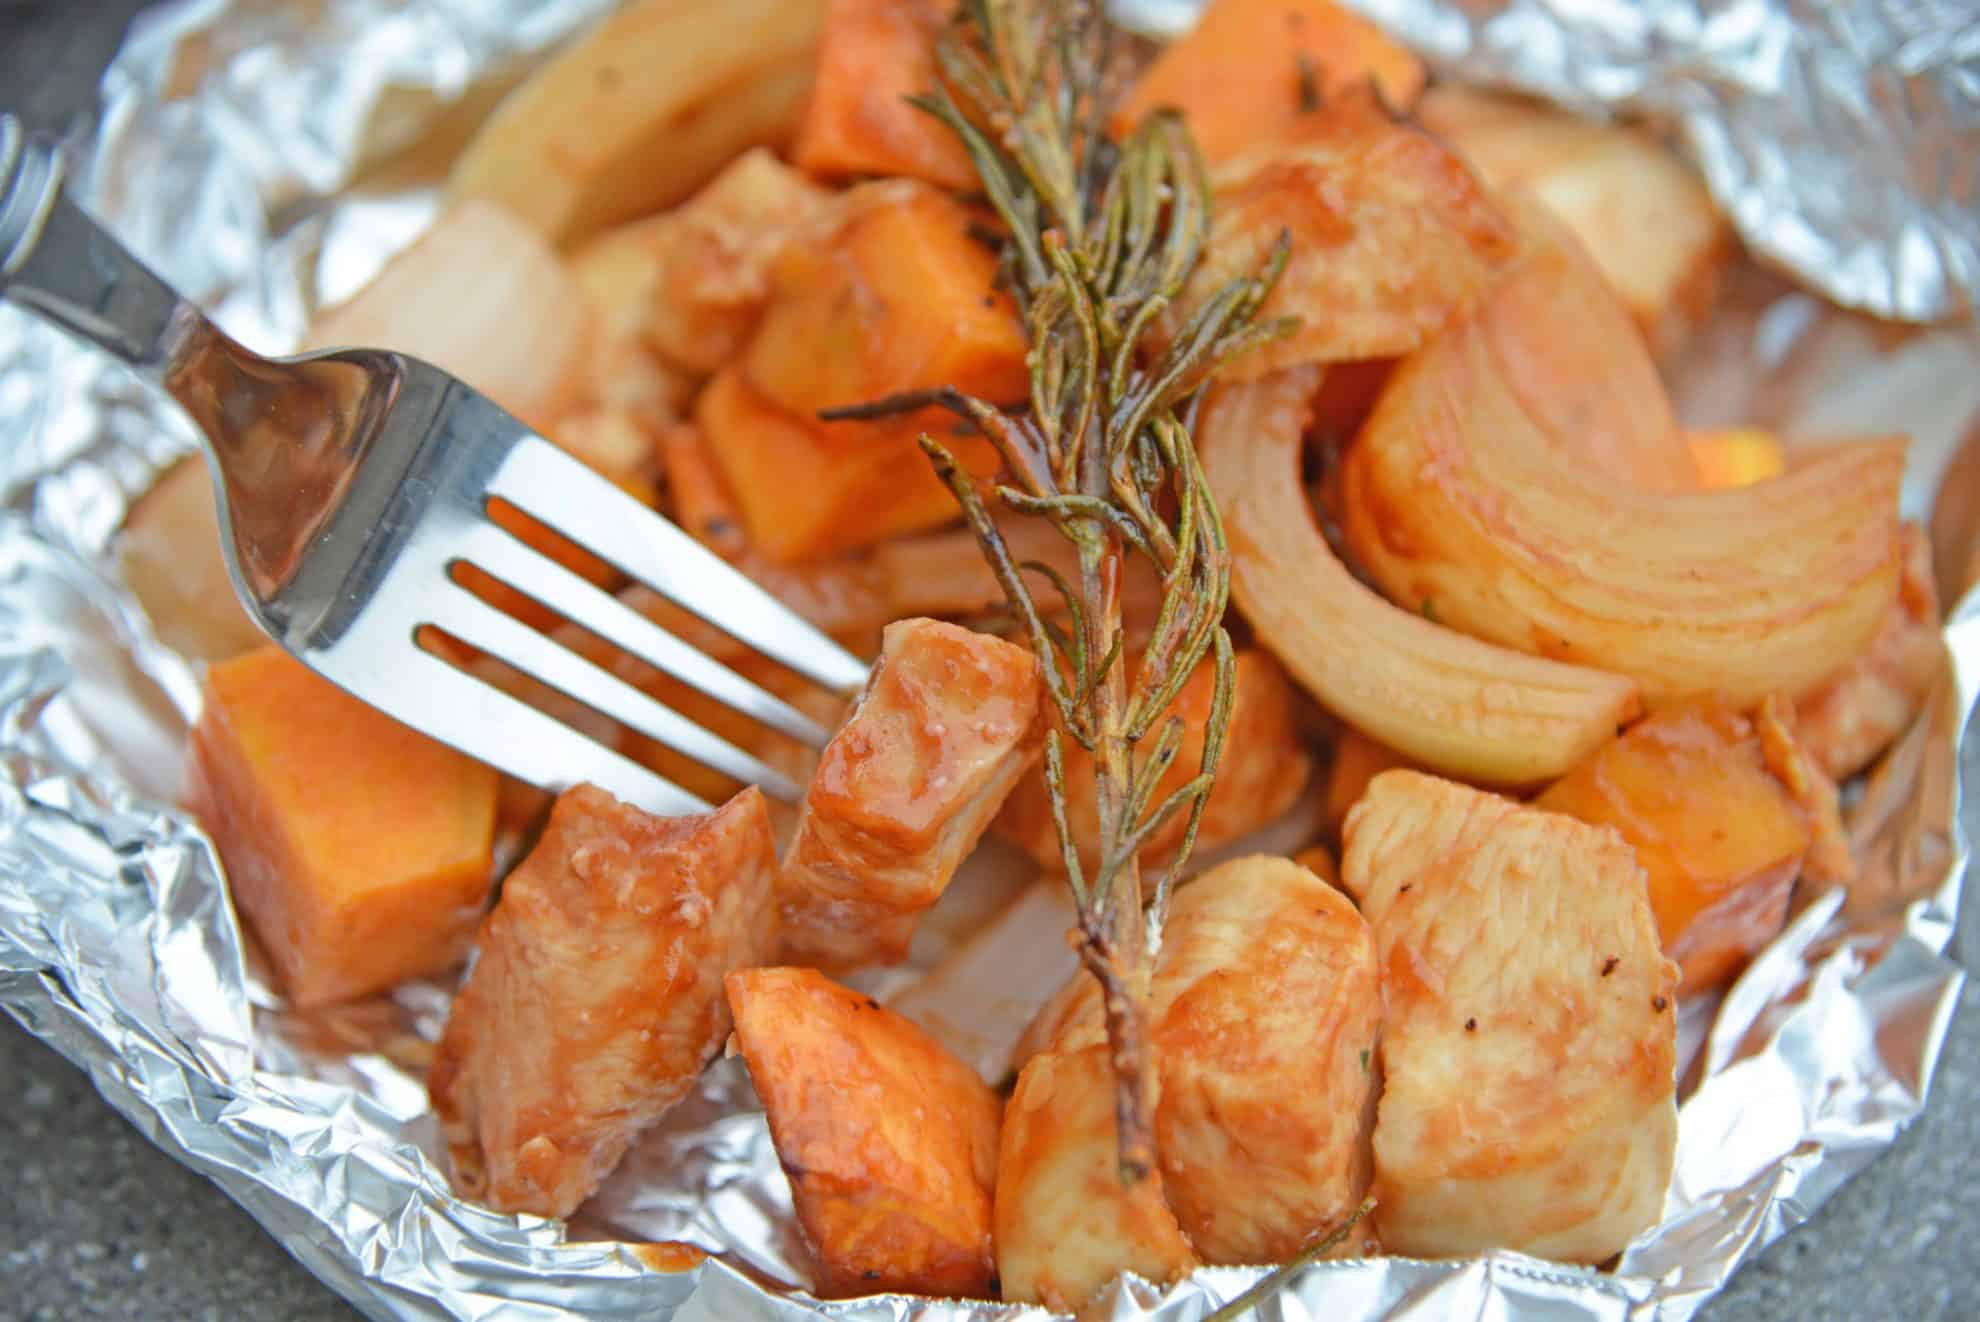 This BBQ Chicken Hobo Dinner is a great dinner option for families on the go. These chicken foil packets are packed full of flavor for a weeknight meal! #hobodinner #chickenfoilpackets #hobopackets www.savoryexperiments.com